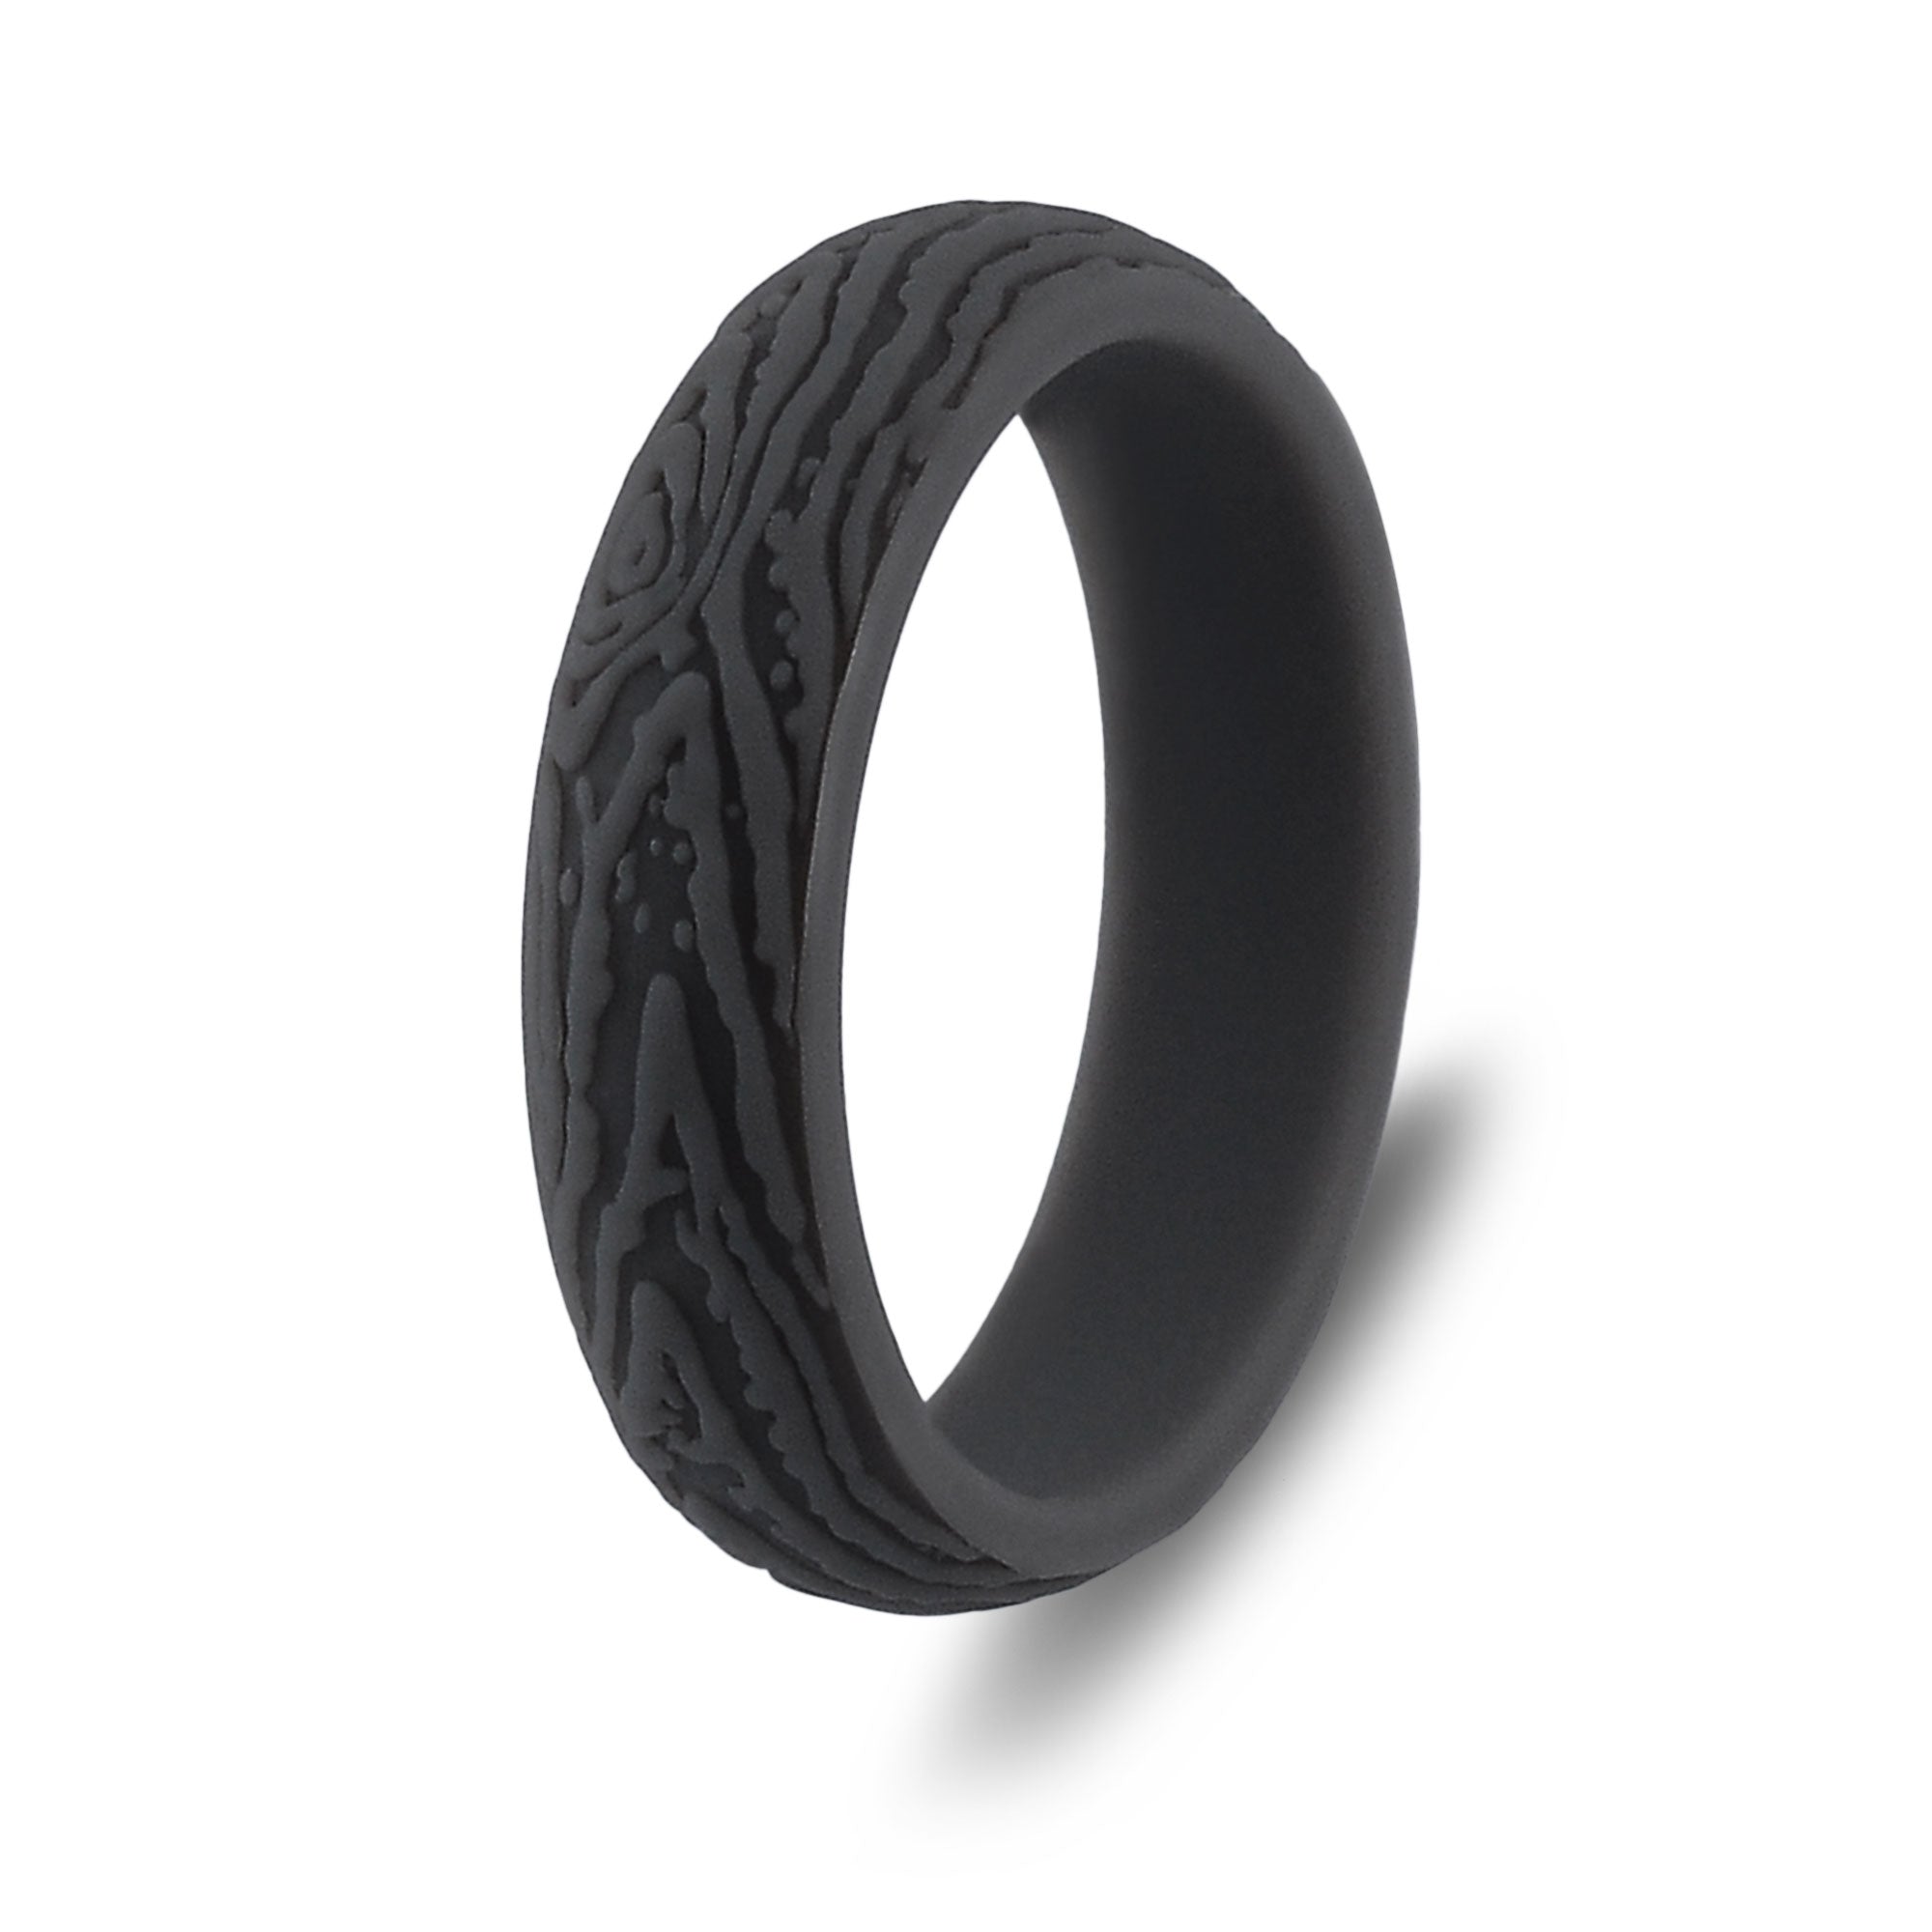 The Twilight Timber - Silicone Ring